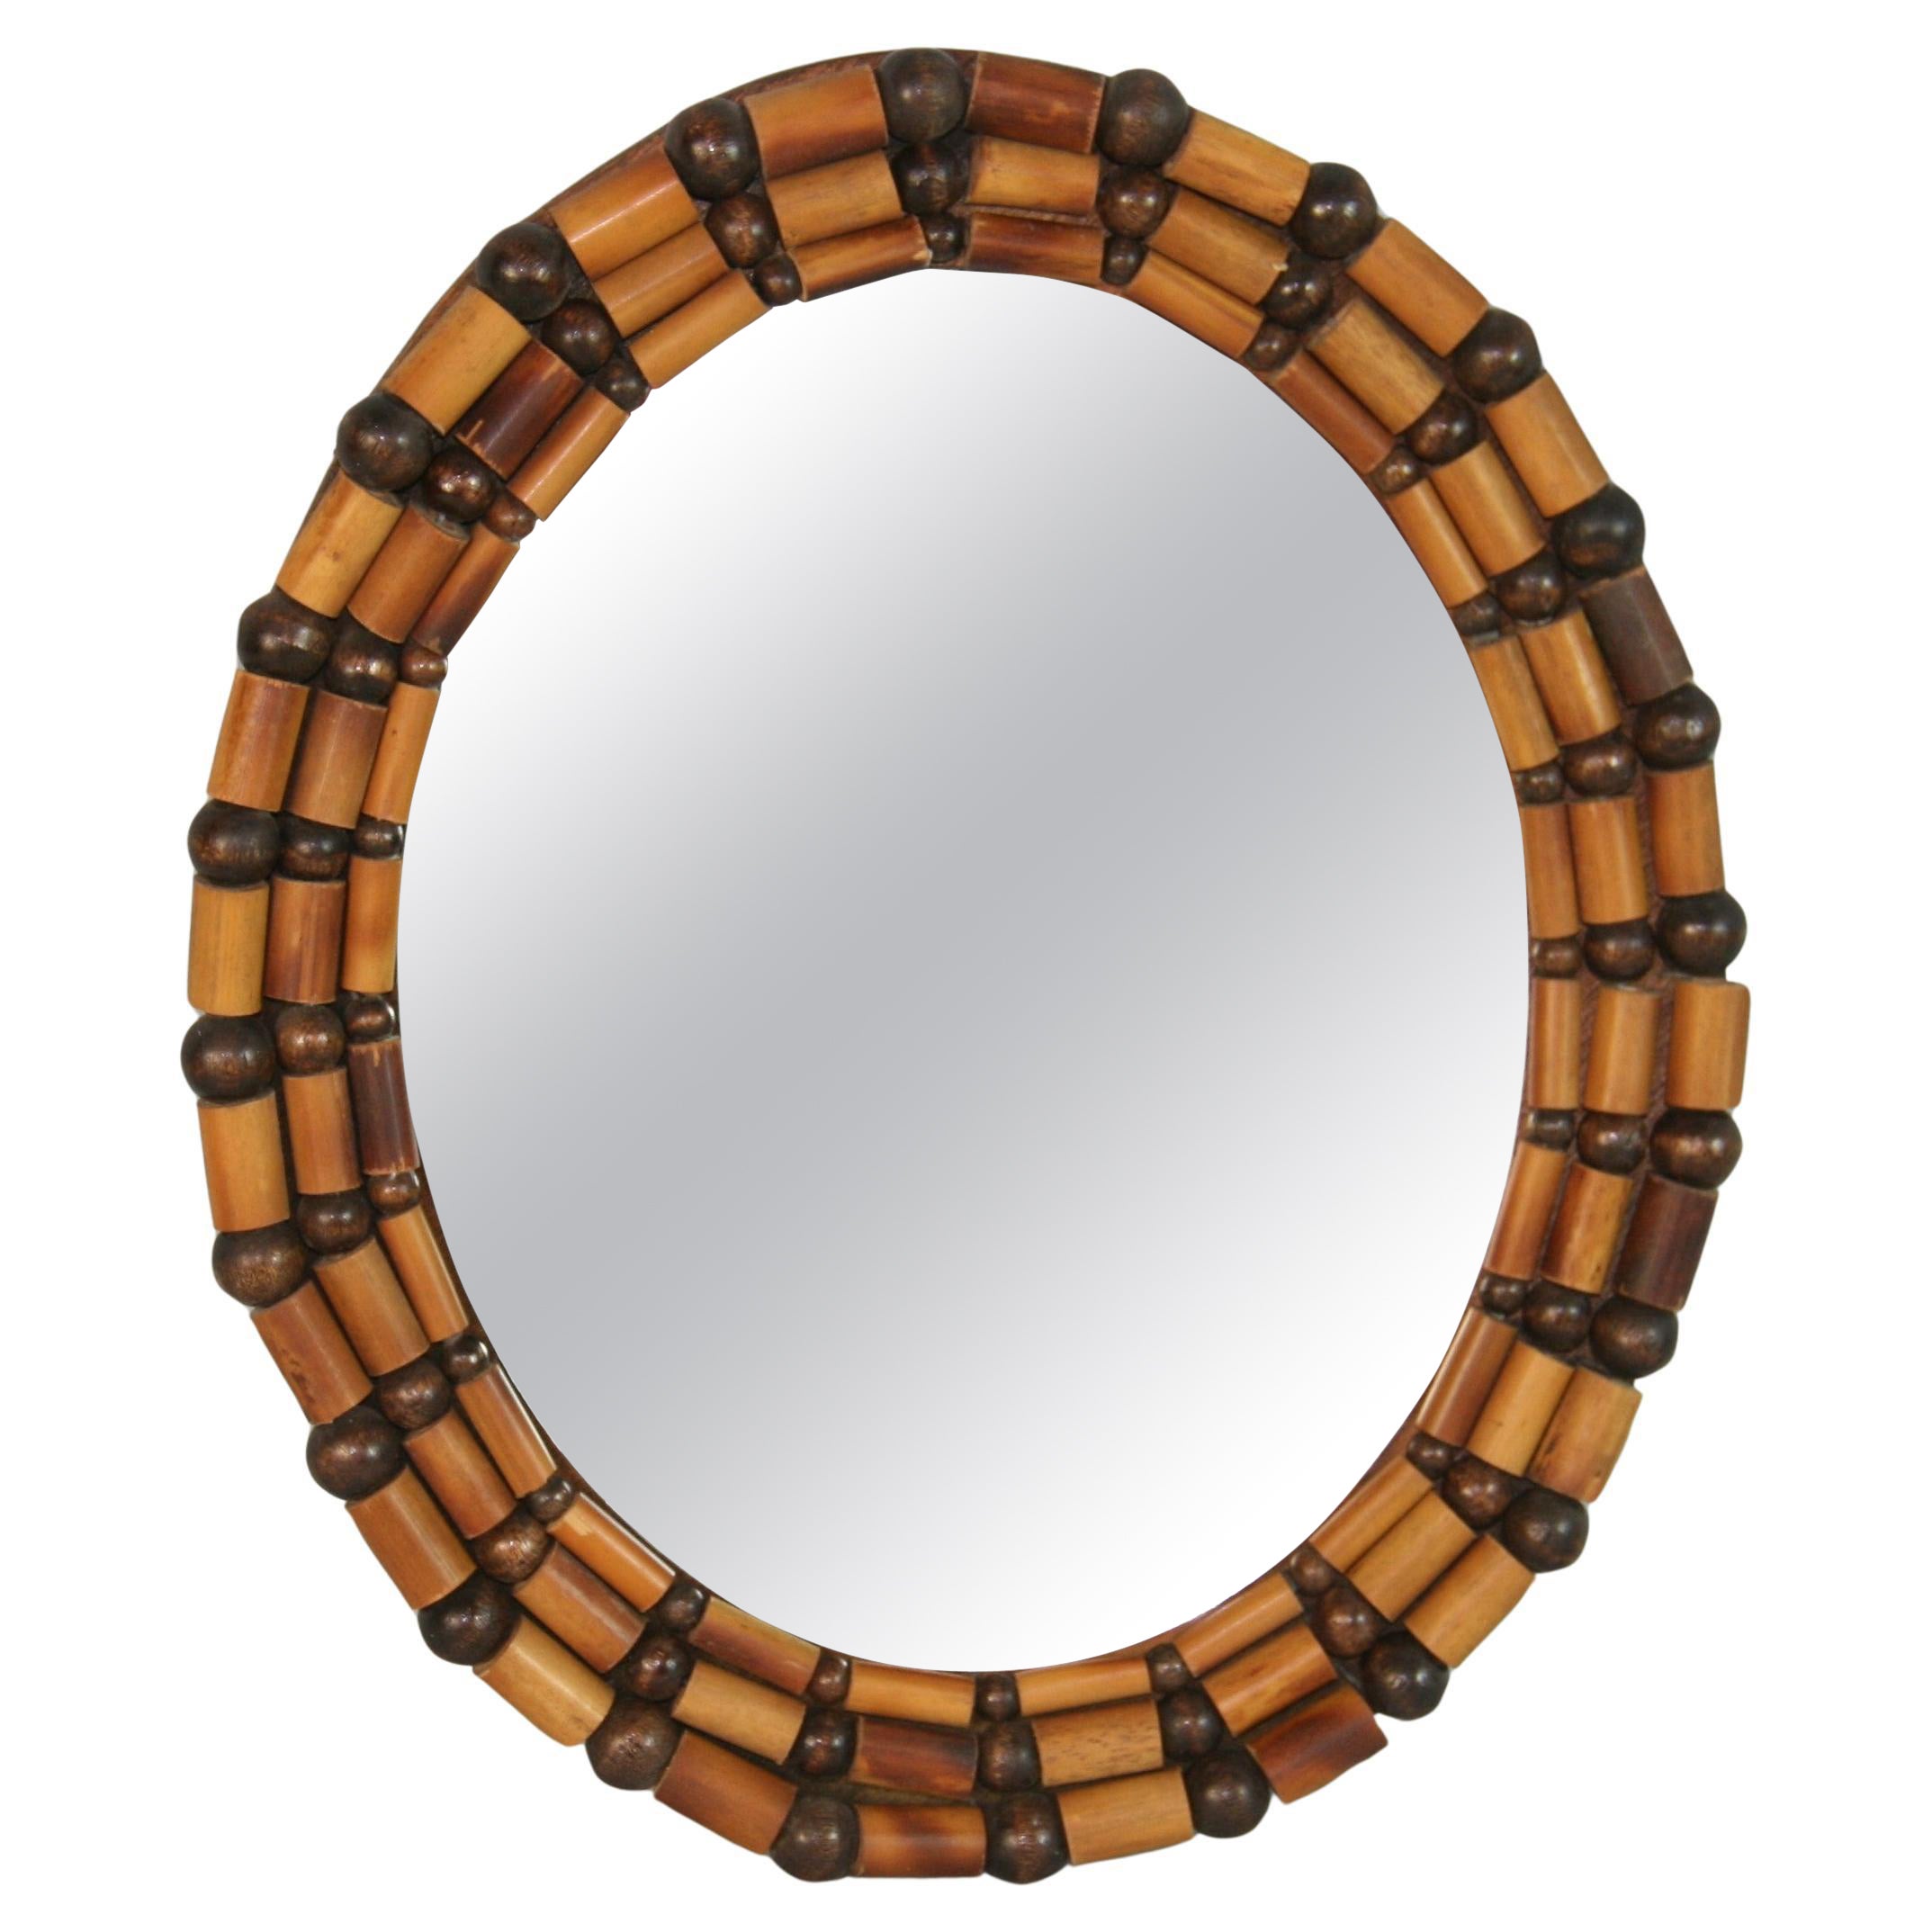 Wood Beads and Balls Small Oval Mirror